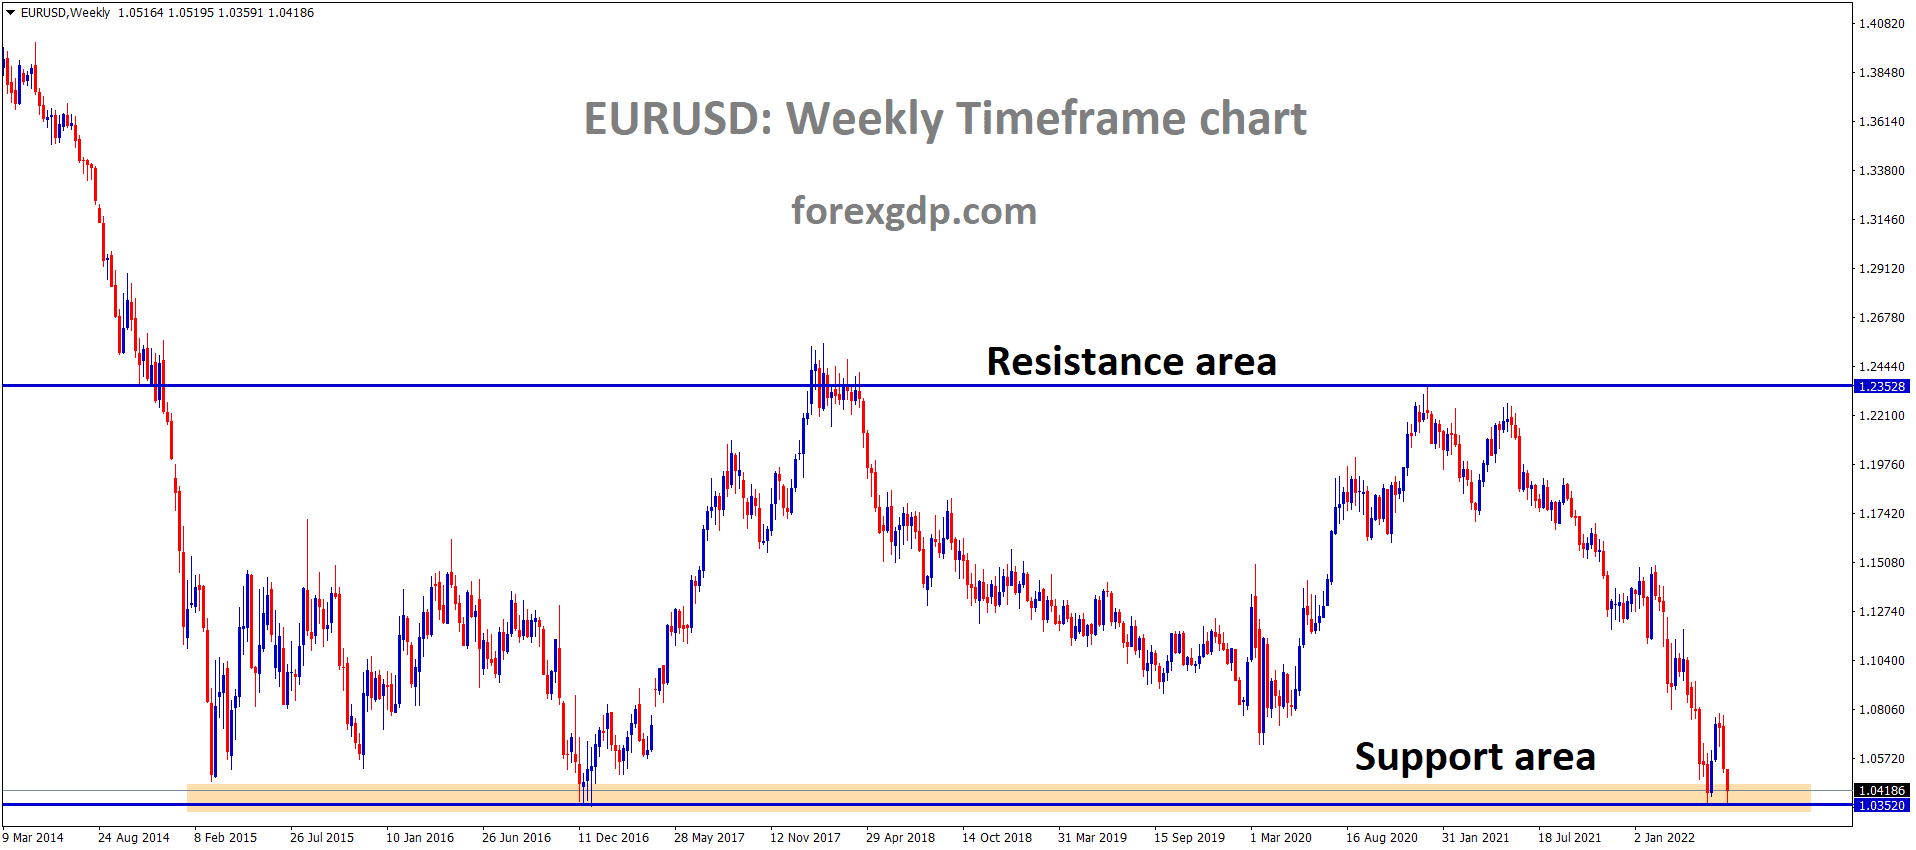 EURUSD is moving in the Box Pattern and the Market has reached the horizontal support area of the Pattern.